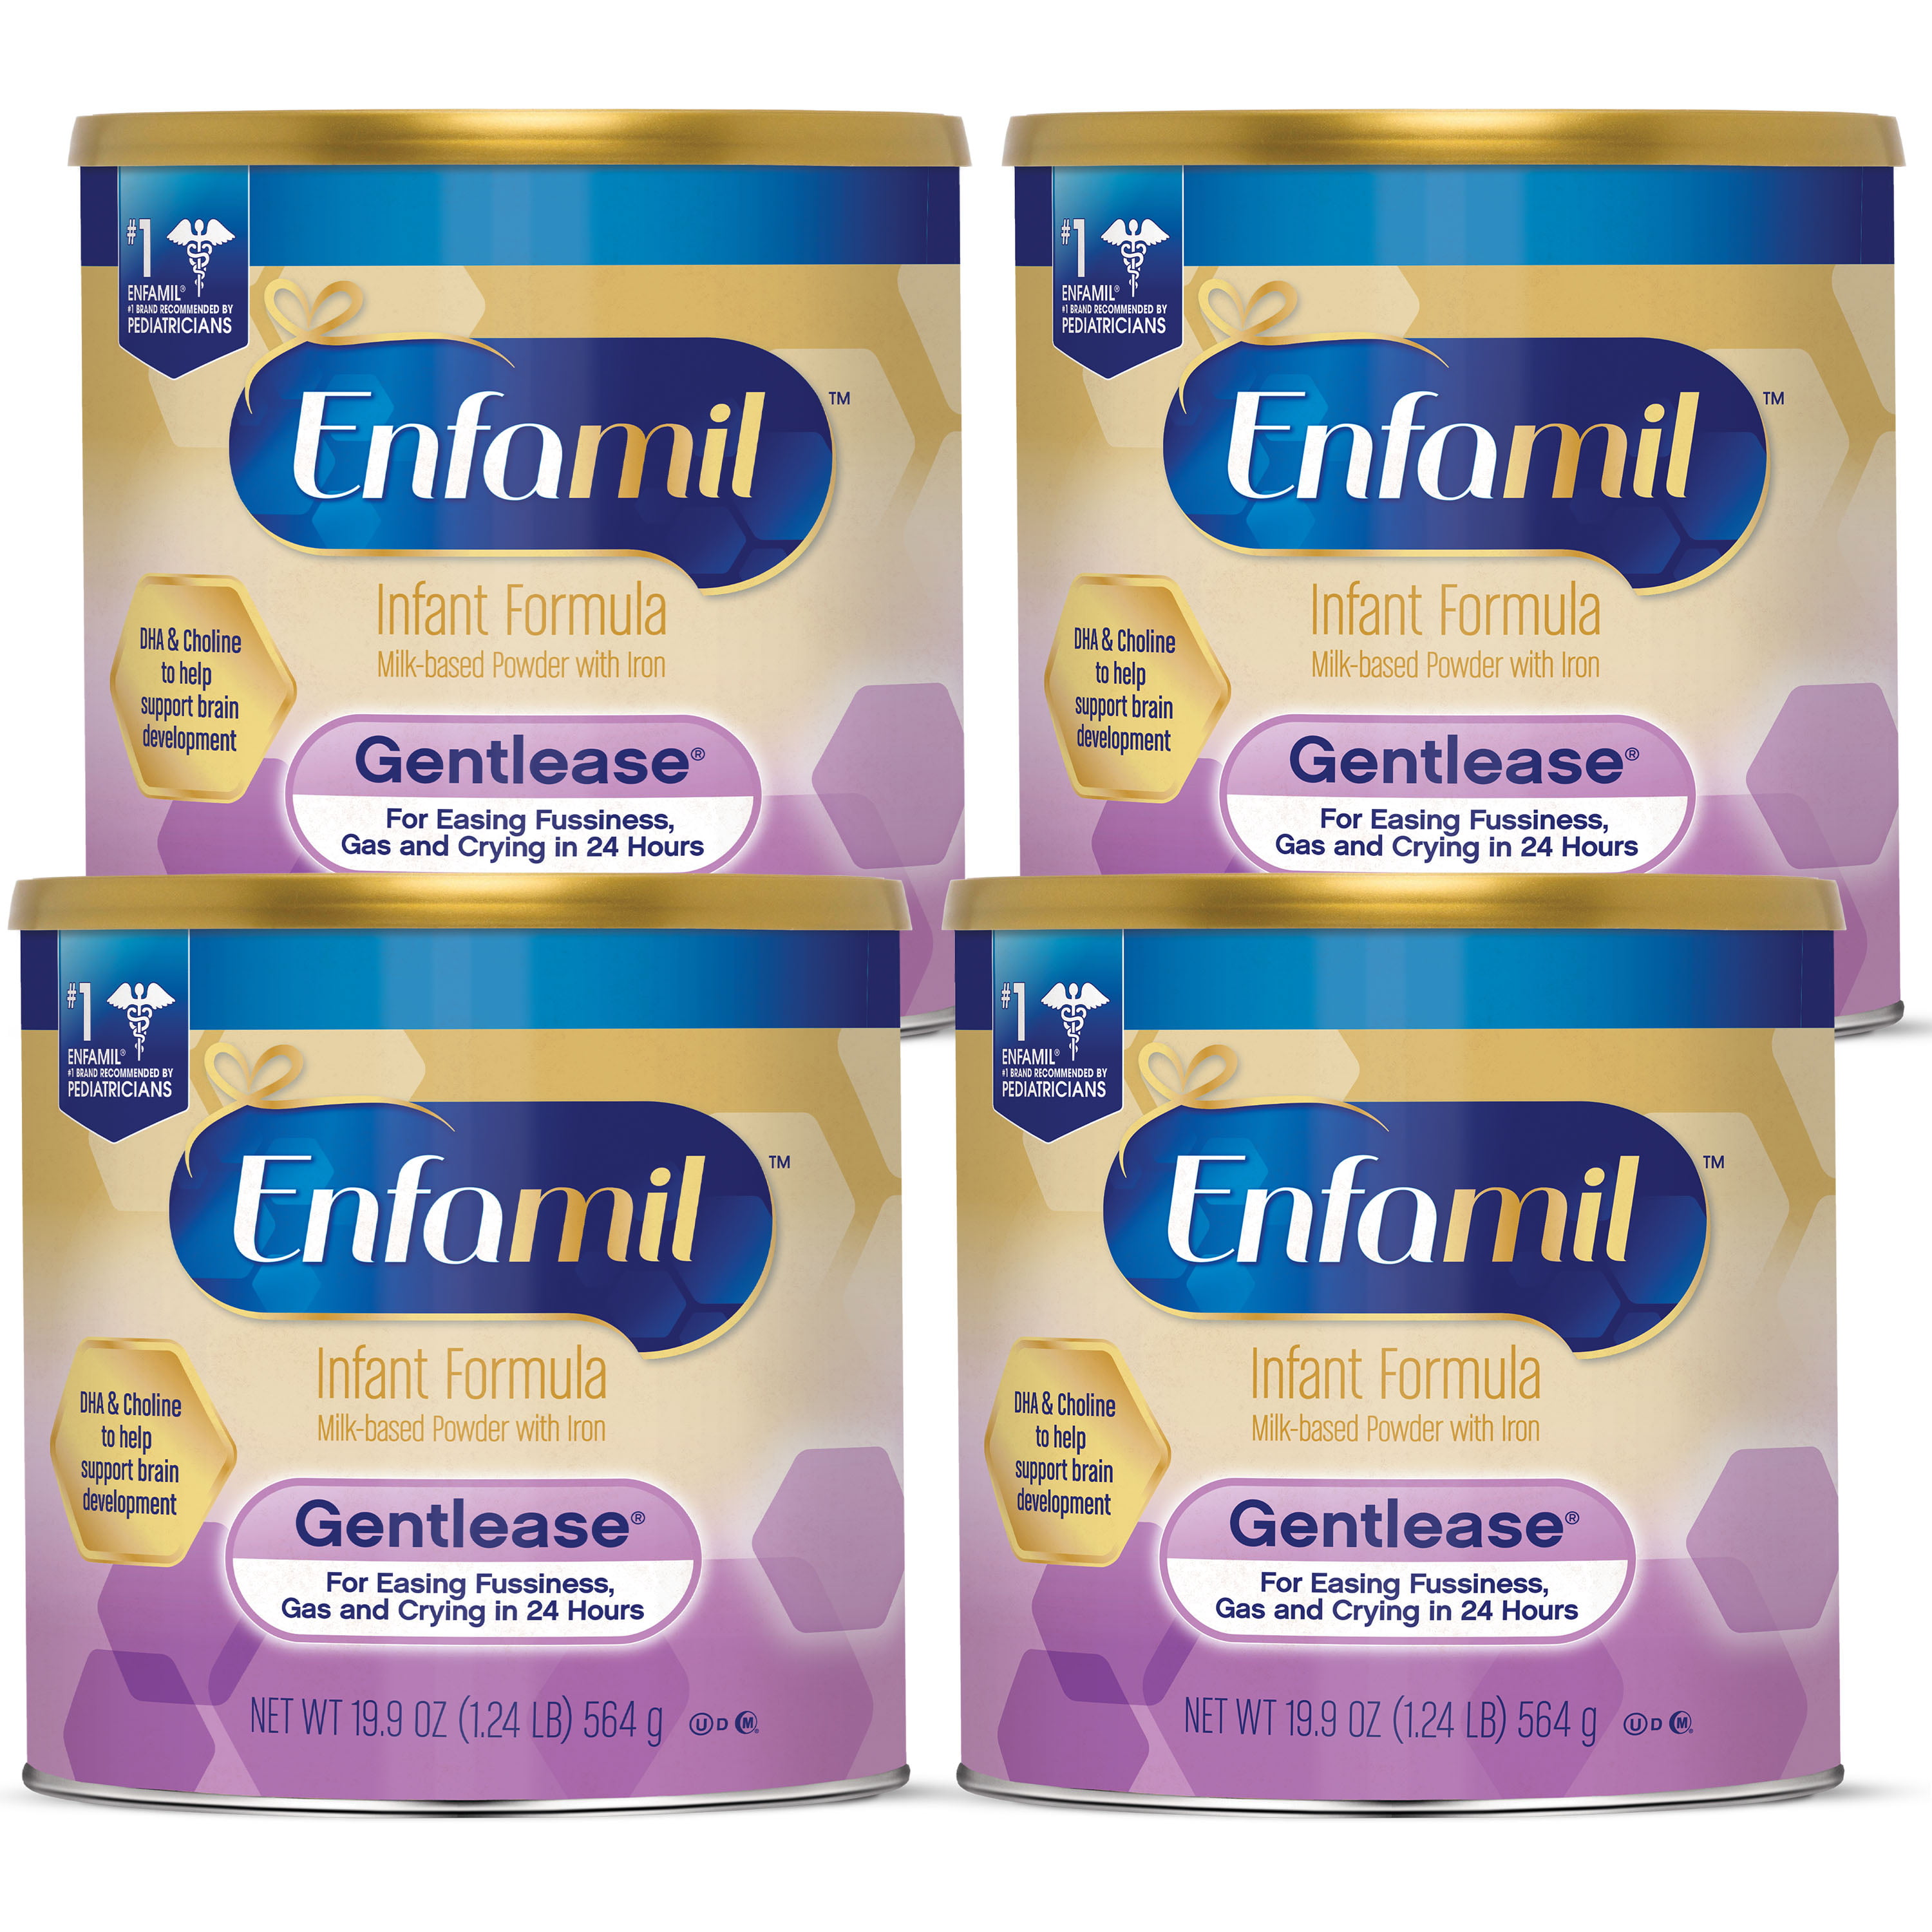 enfamil-gentlease-baby-formula-reduces-fussiness-gas-crying-and-spit